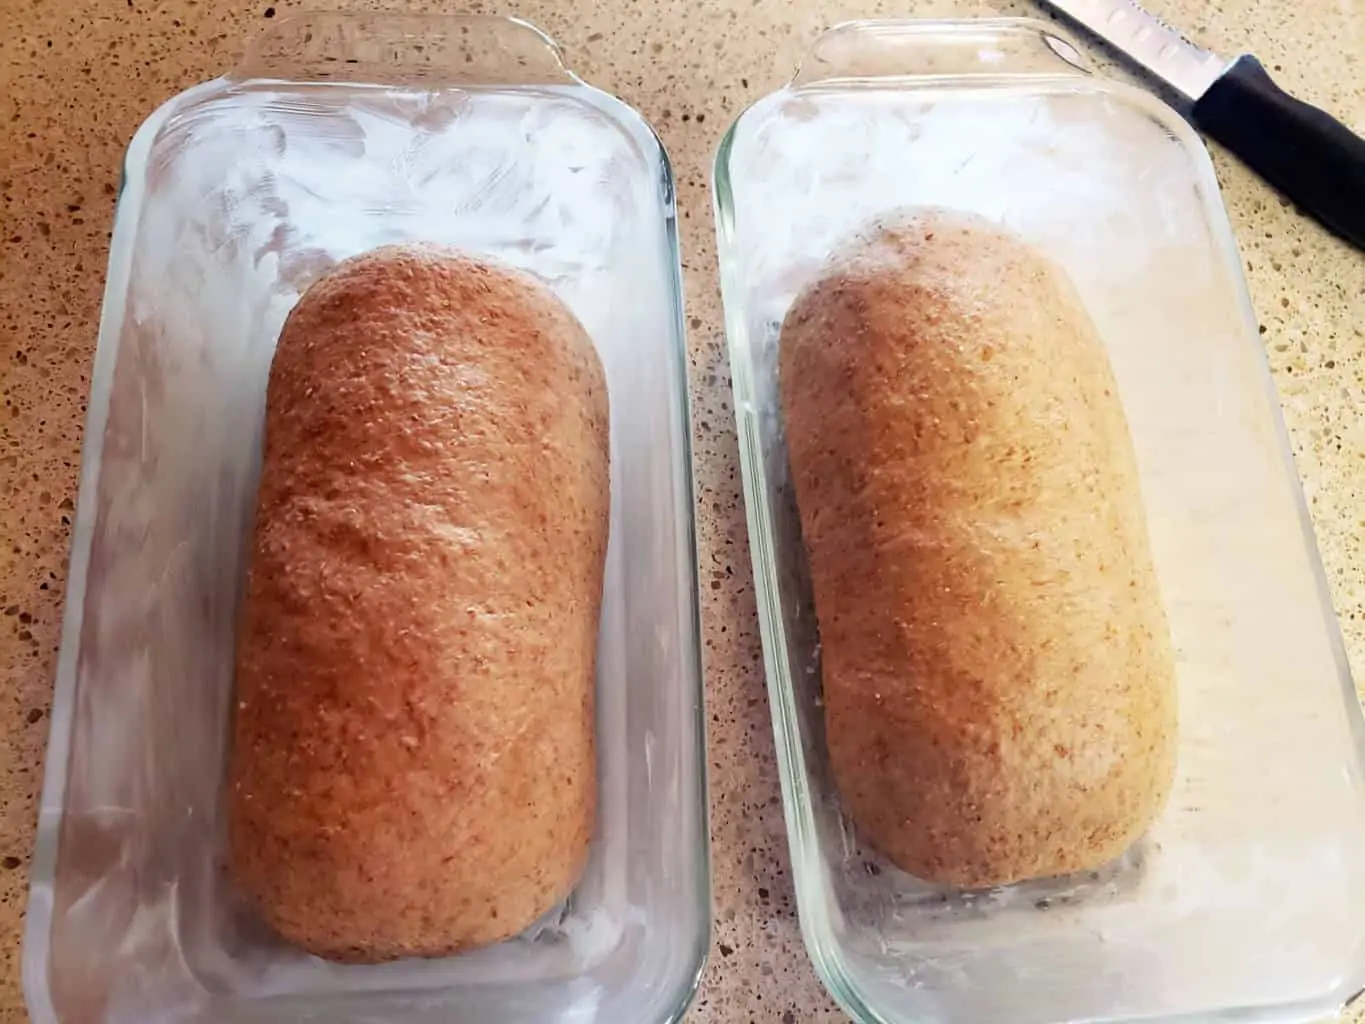 Molasses Whole Wheat Bread dough loaves formed in buttered bread pans